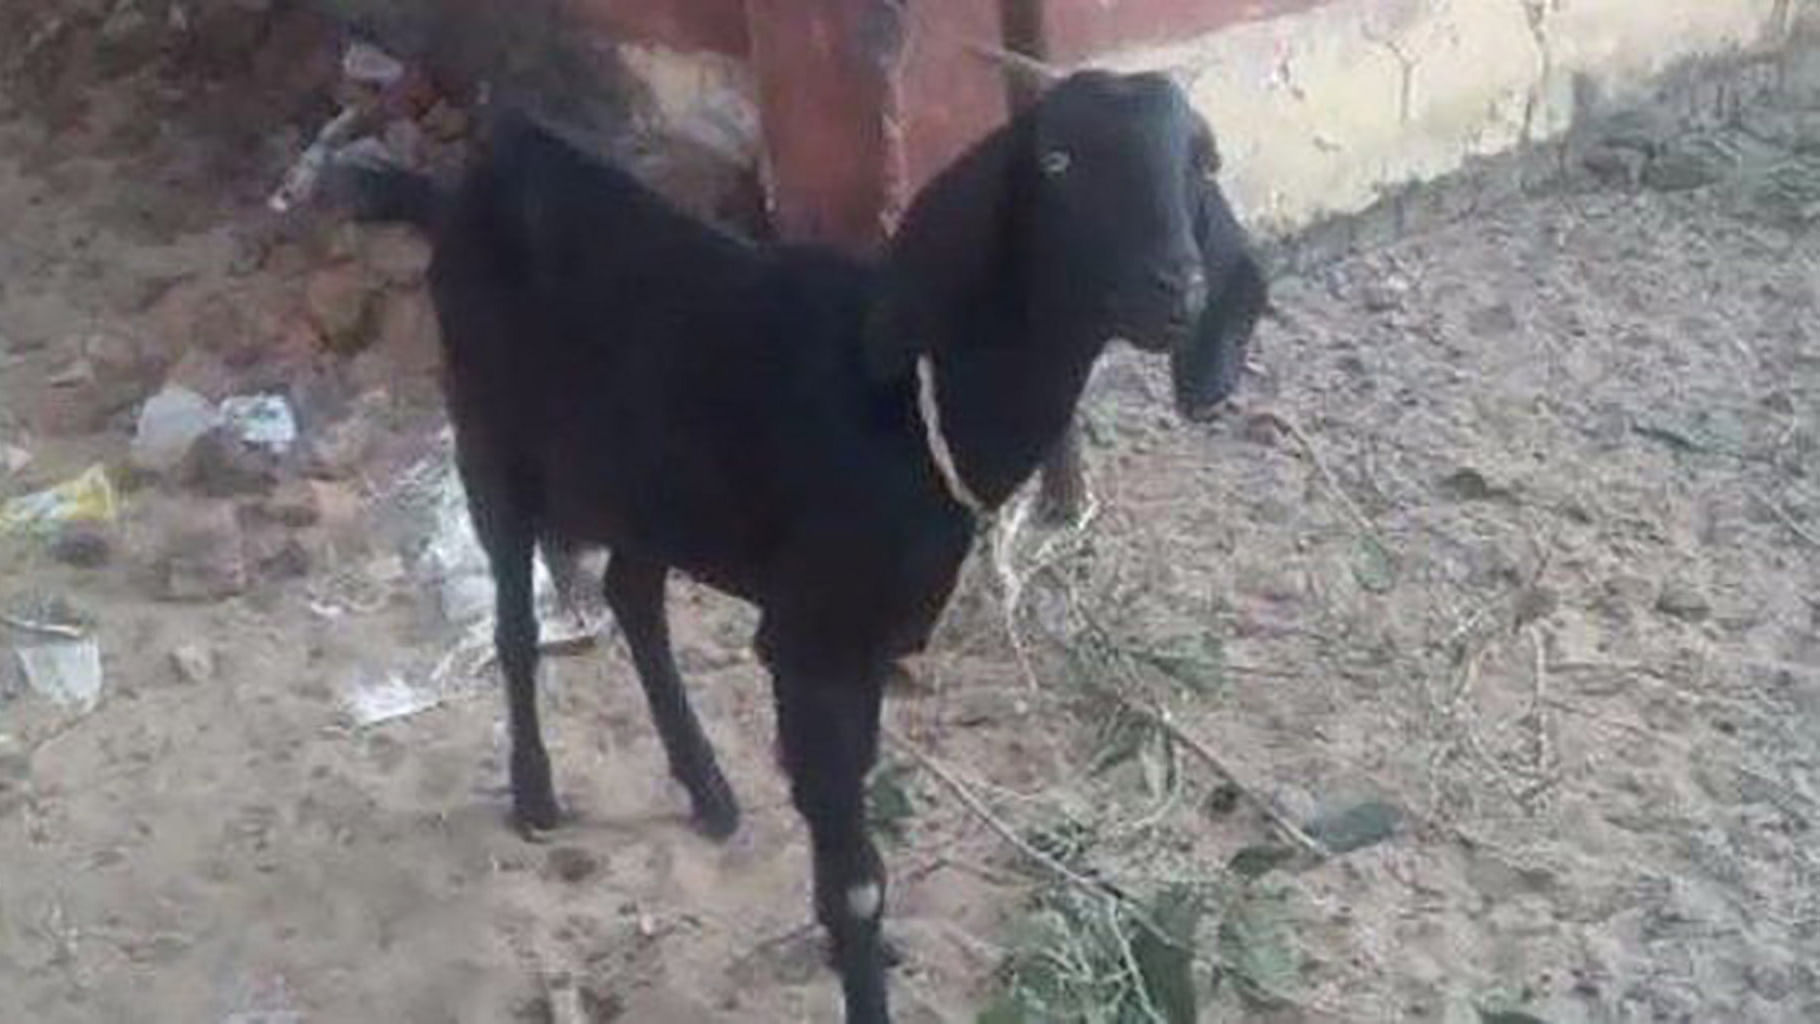 The goat who dared to follow its natural instinct. (Photo: ANI)